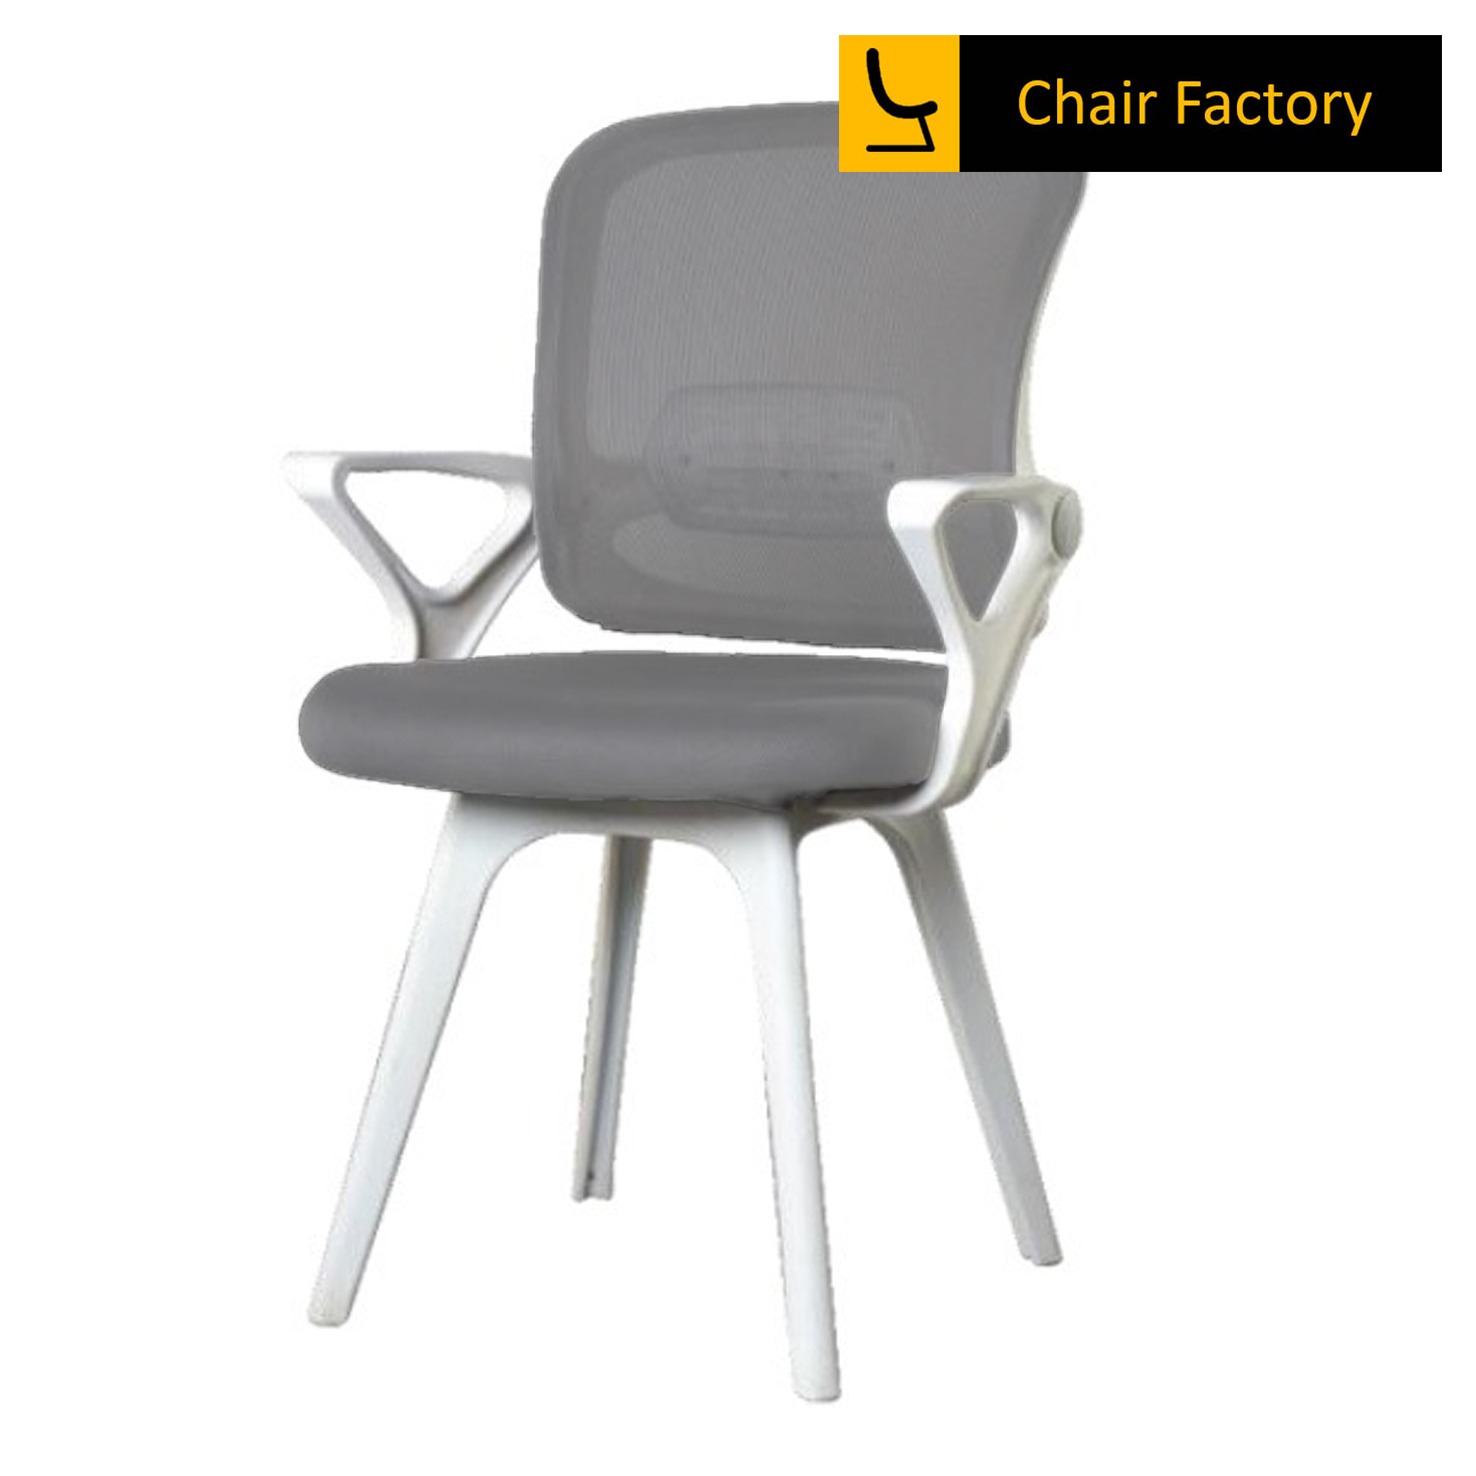 Euroton white visitor office chair